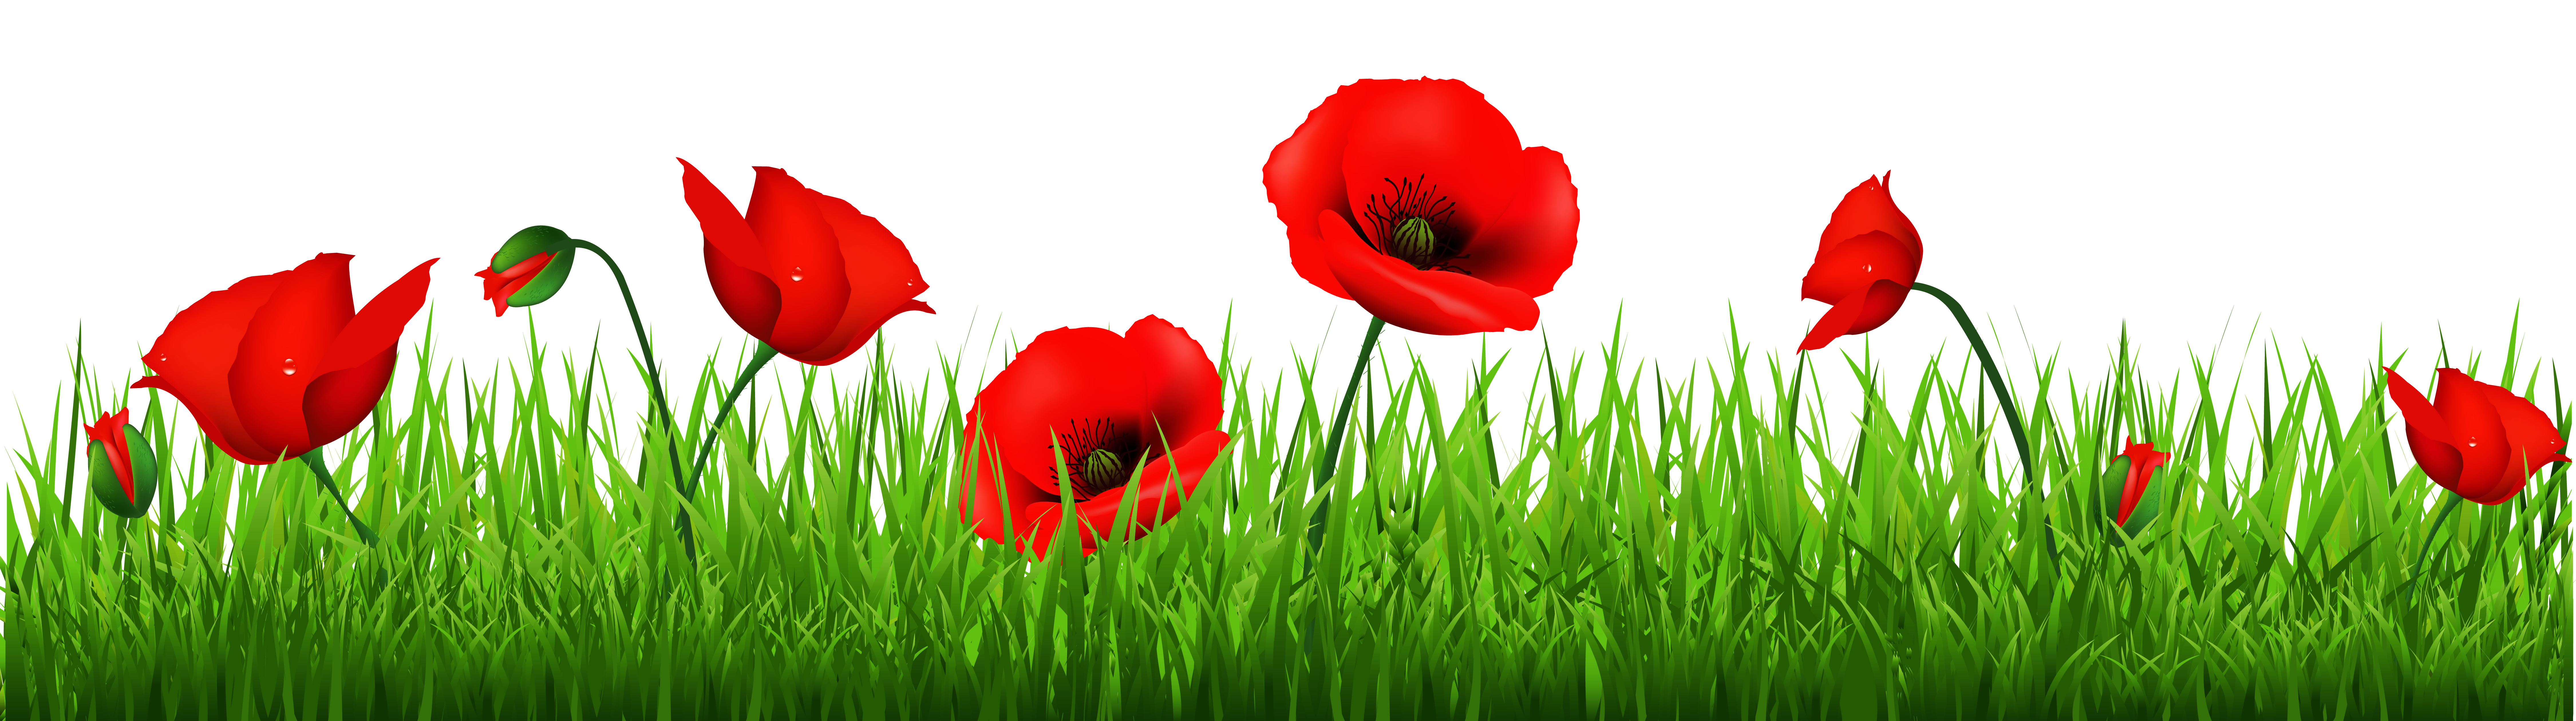 free clipart images poppies - photo #9